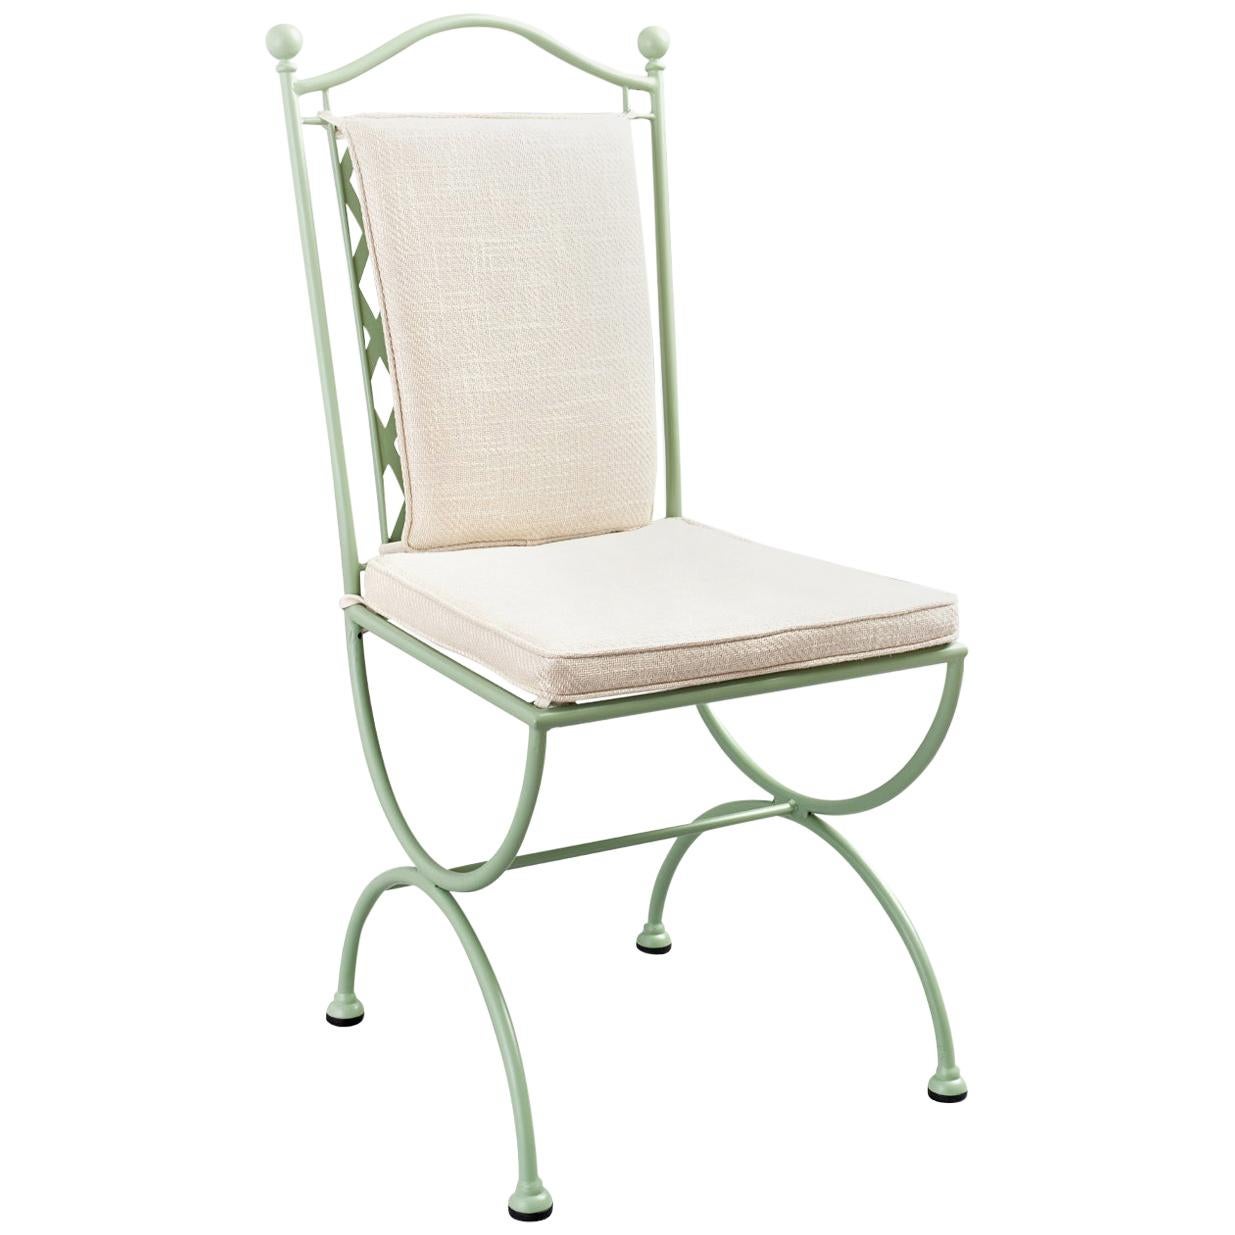 Rombo Outdoor Green Wrought Iron Chair For Sale